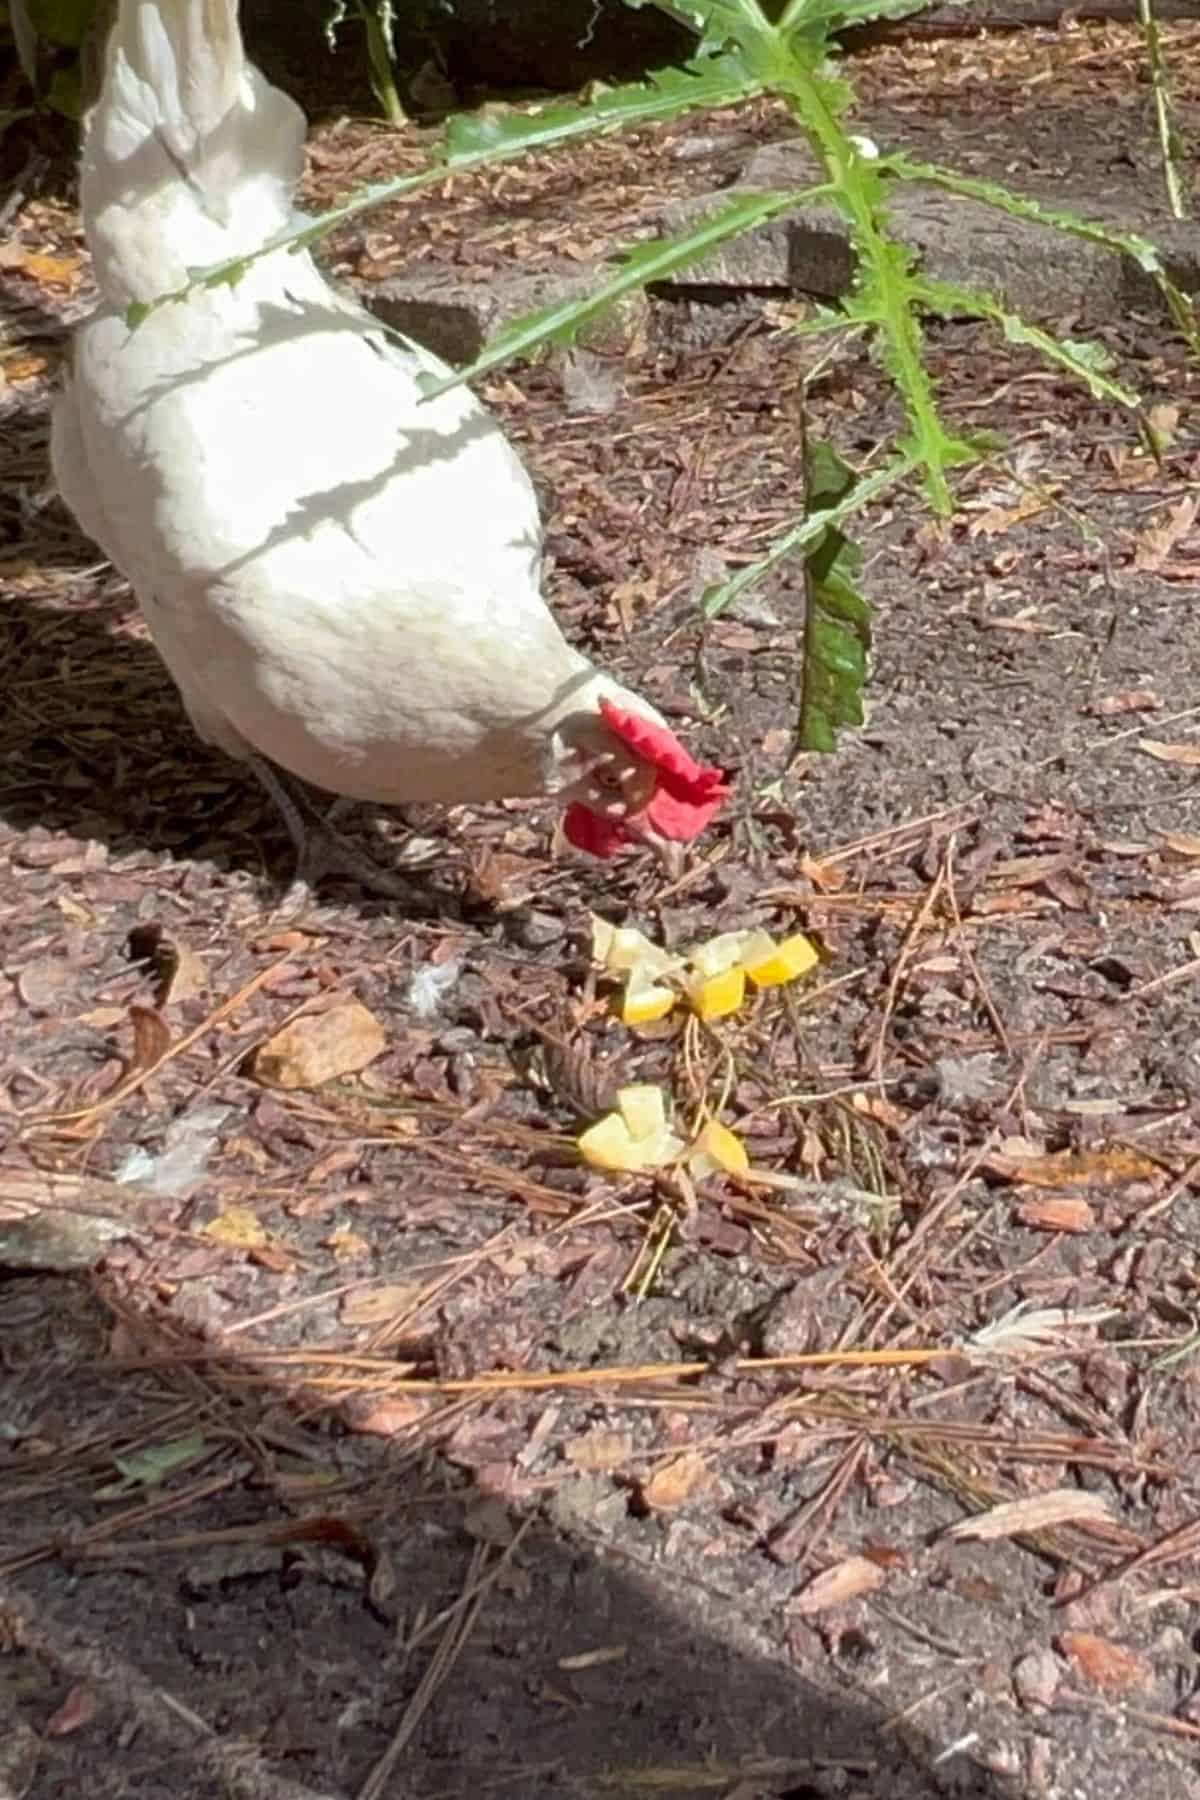 Chicken eating lemons off the ground.